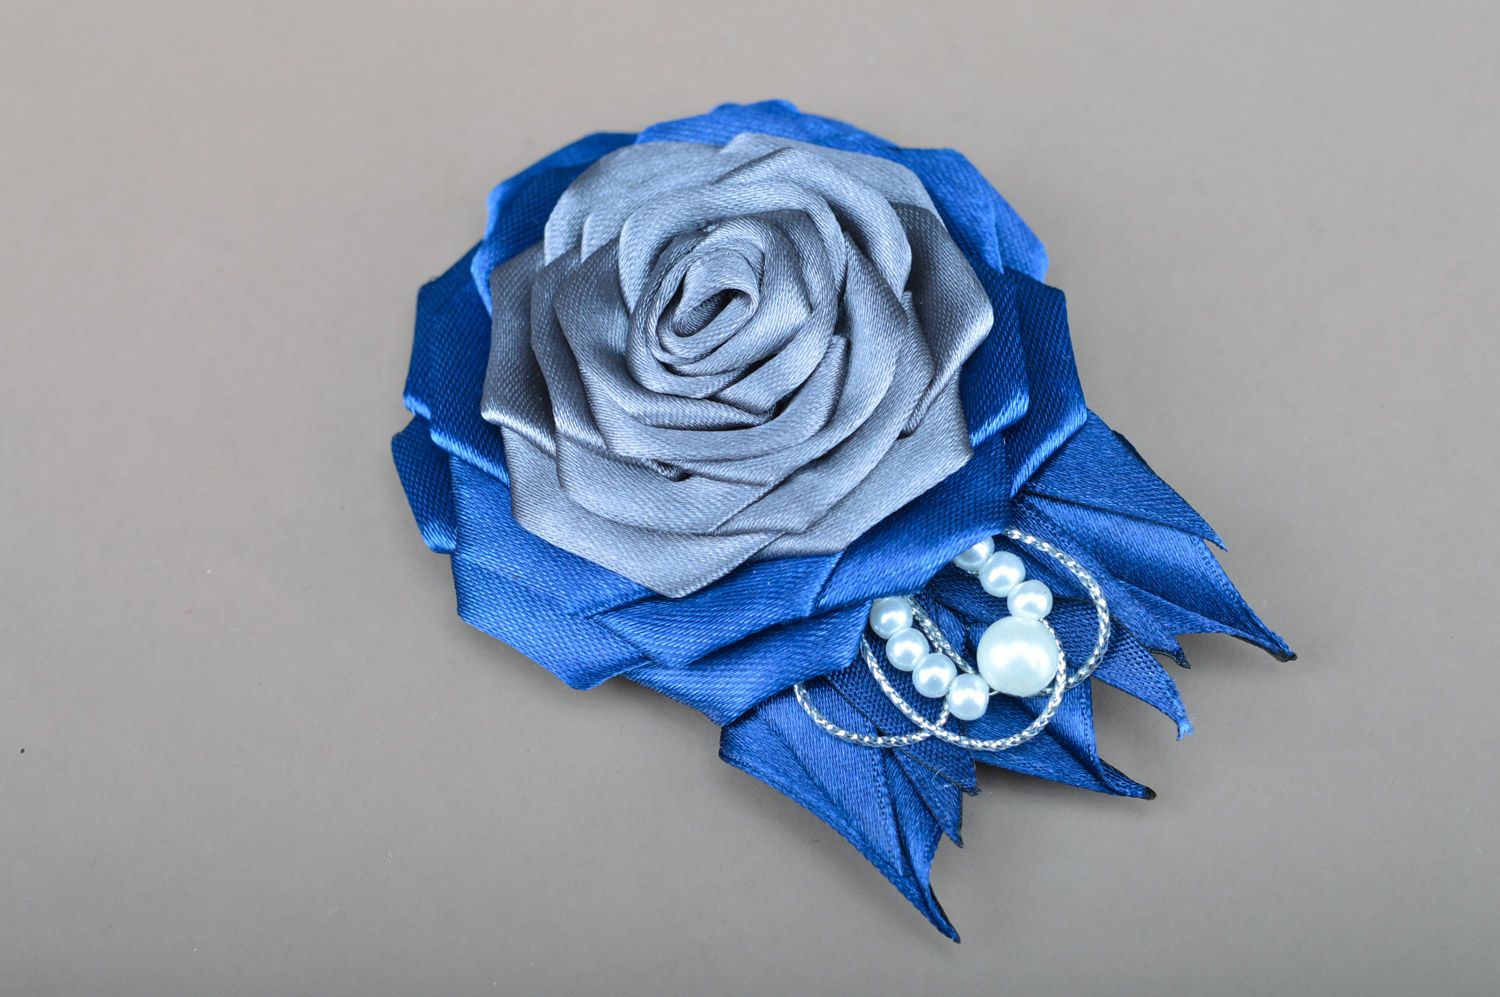 Handmade designer fabric brooch in the shape of blue and gray rose with beads photo 3